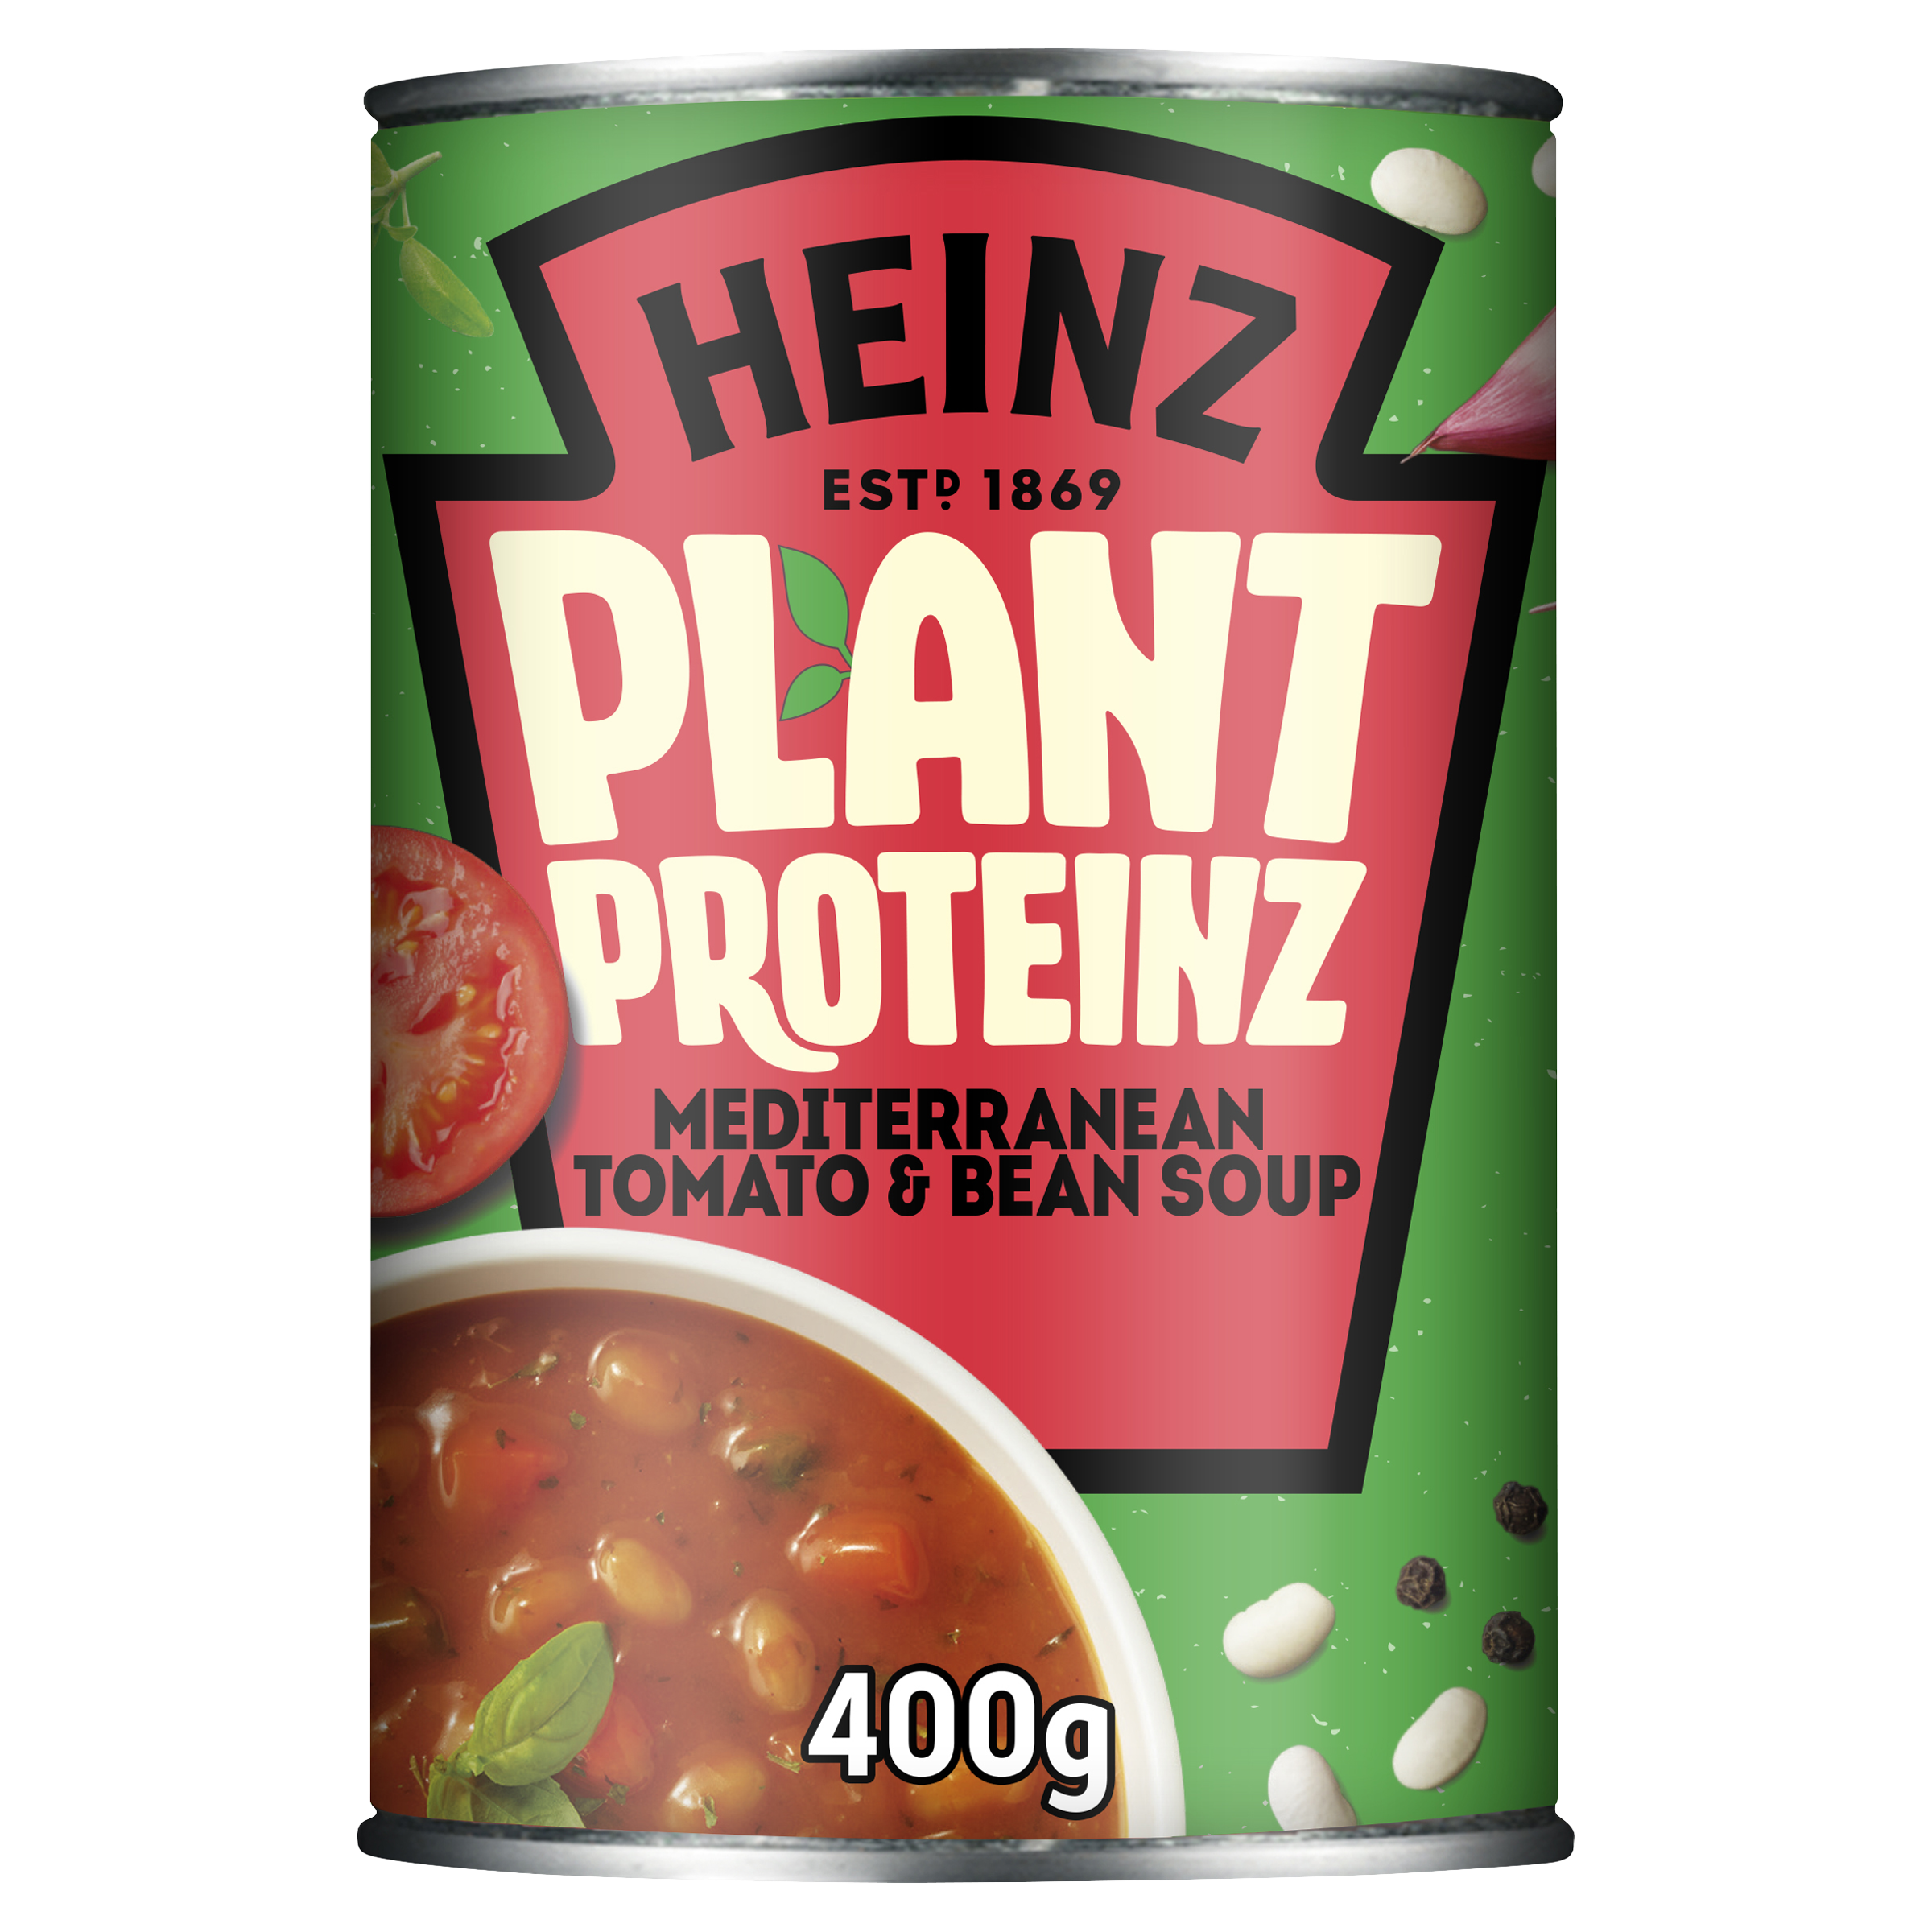 Photograph of Heinz Plant Proteinz Mediterranean Tomato Soup 400g product